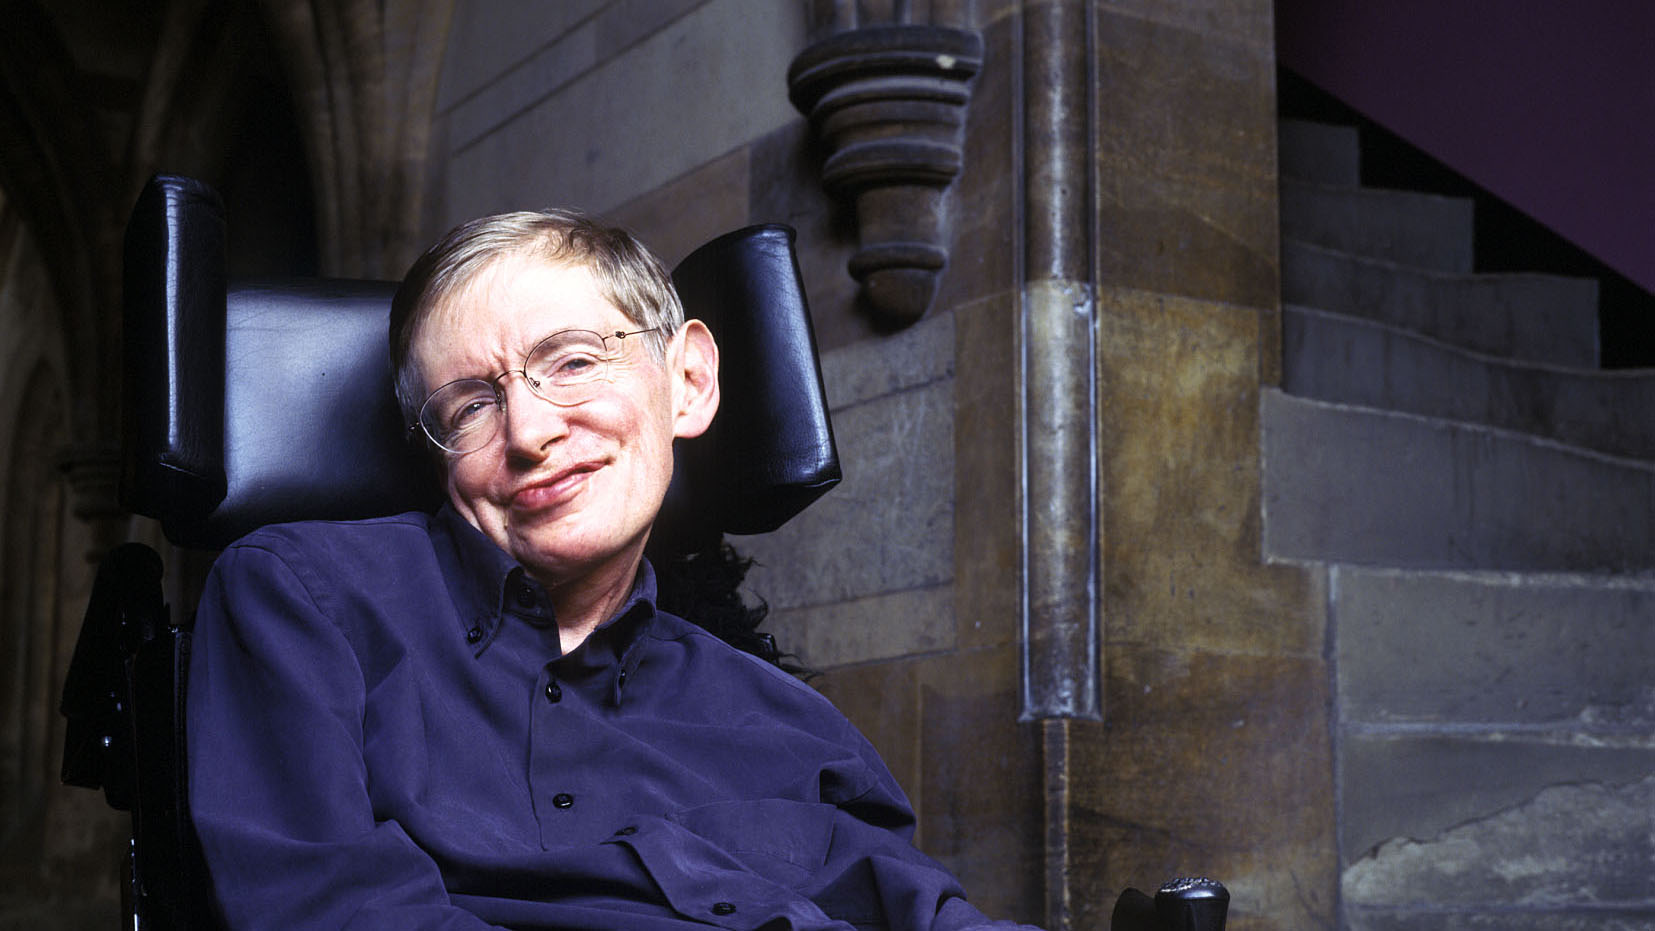 The actual Time Lord, Professor Stephen Hawking